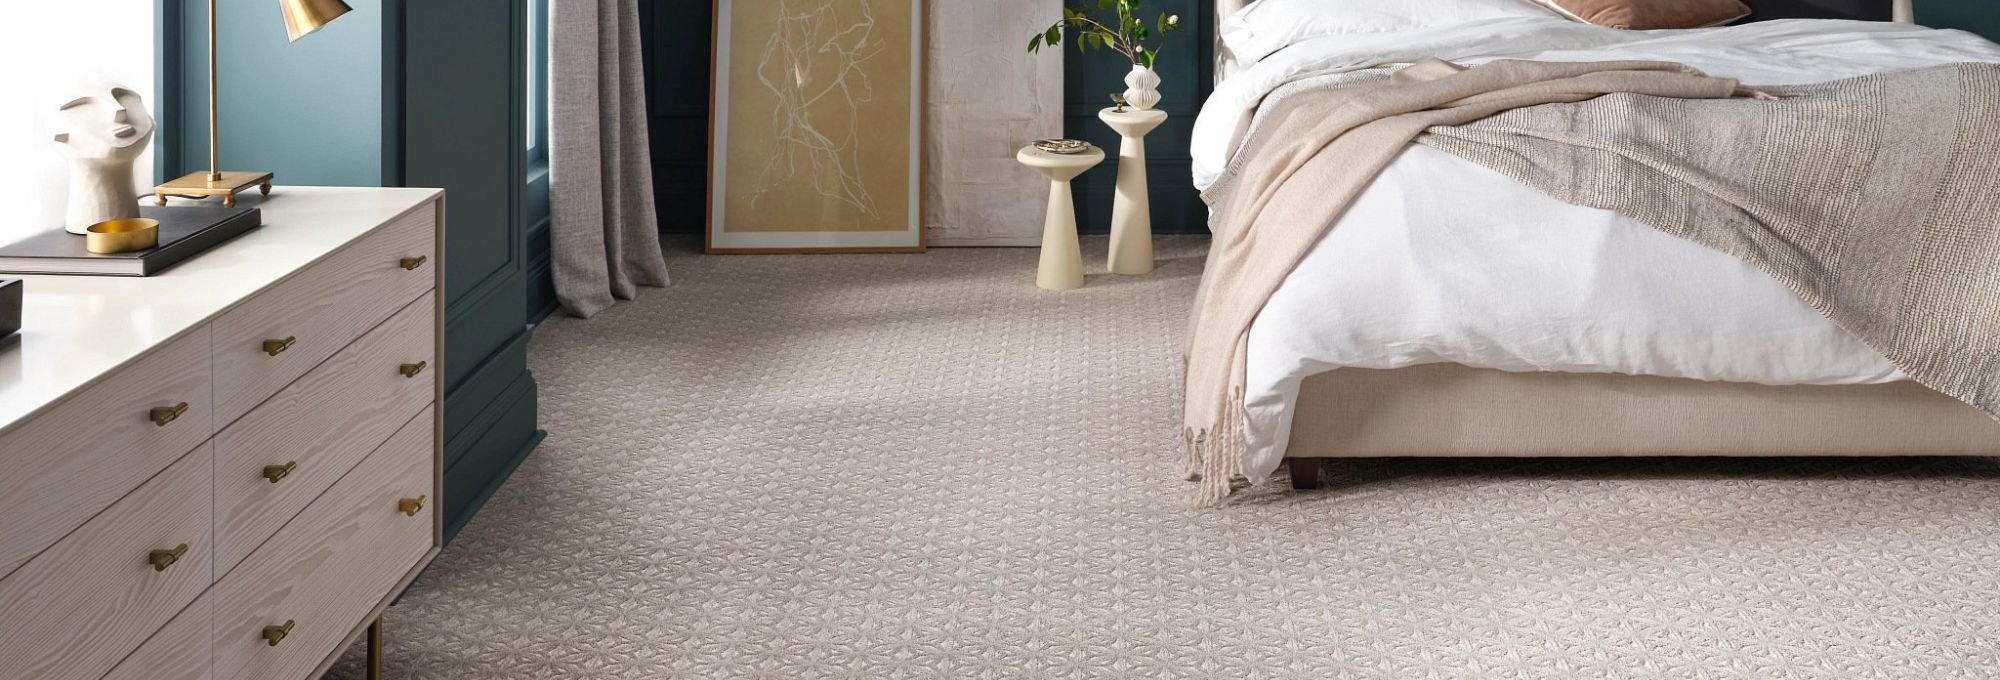 Carpets Articles from Devine Flooring in Wilton